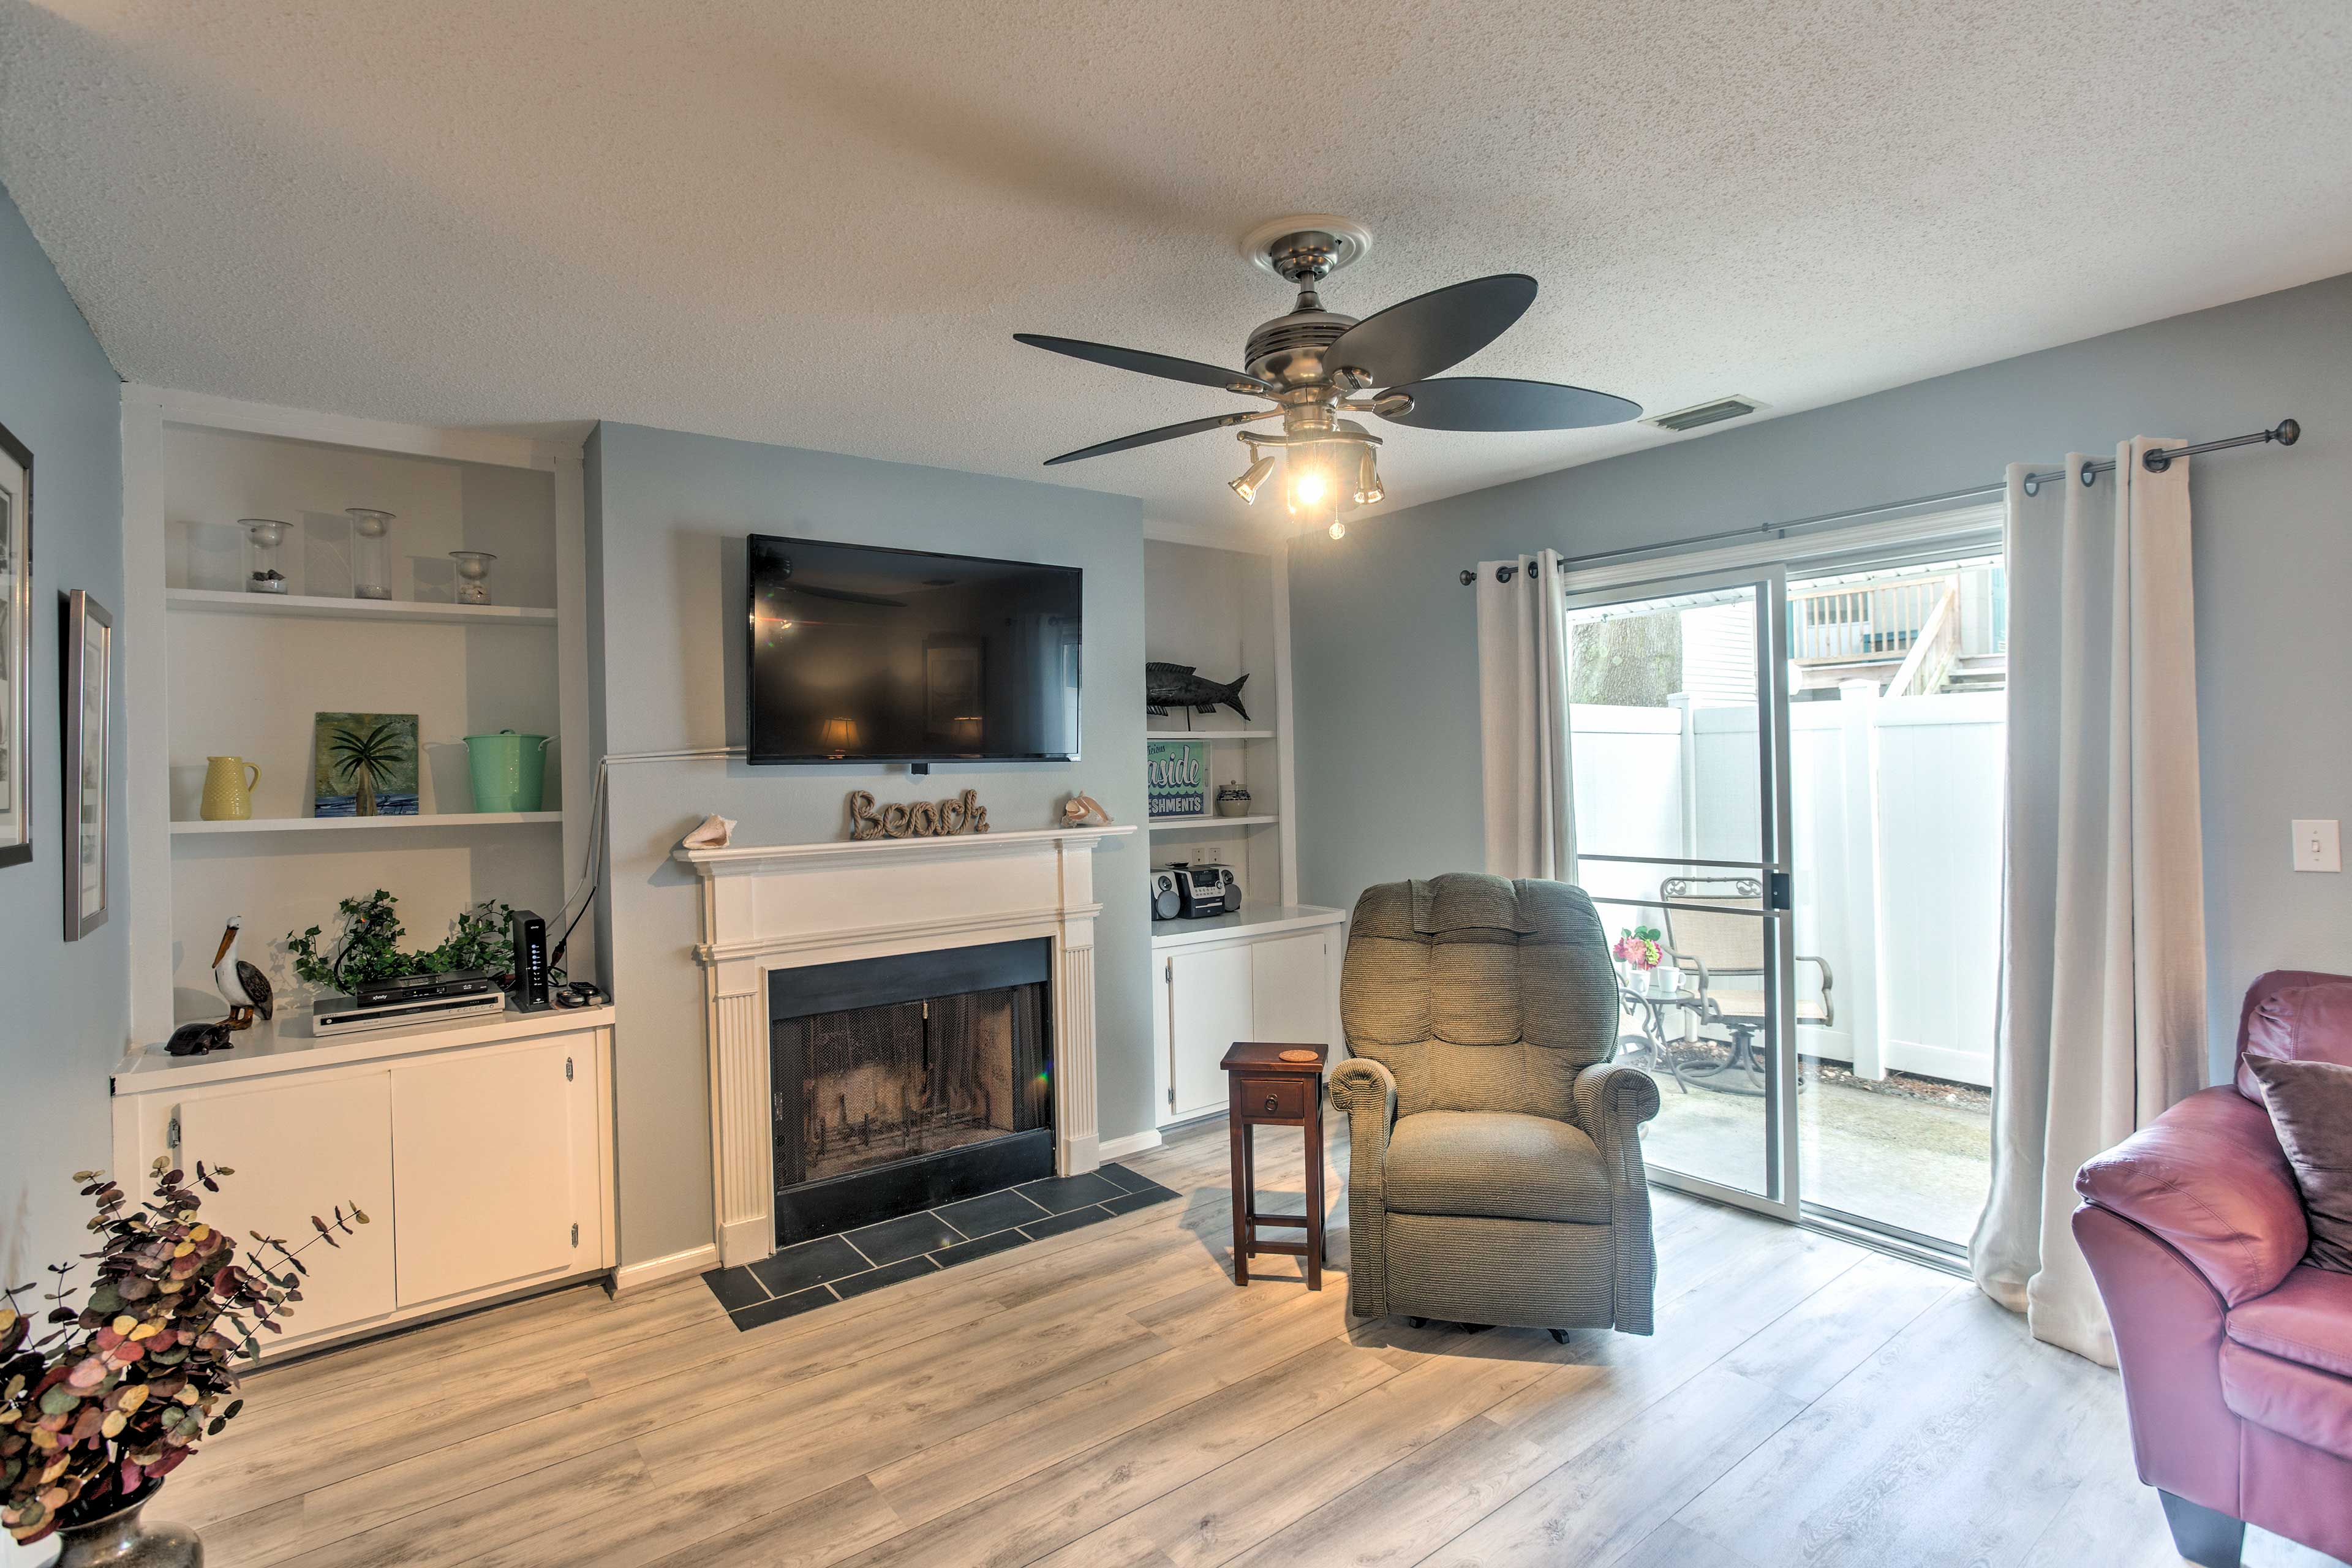 This 1,150-square-foot unit comfortably sleeps 7 and has nautical decor!